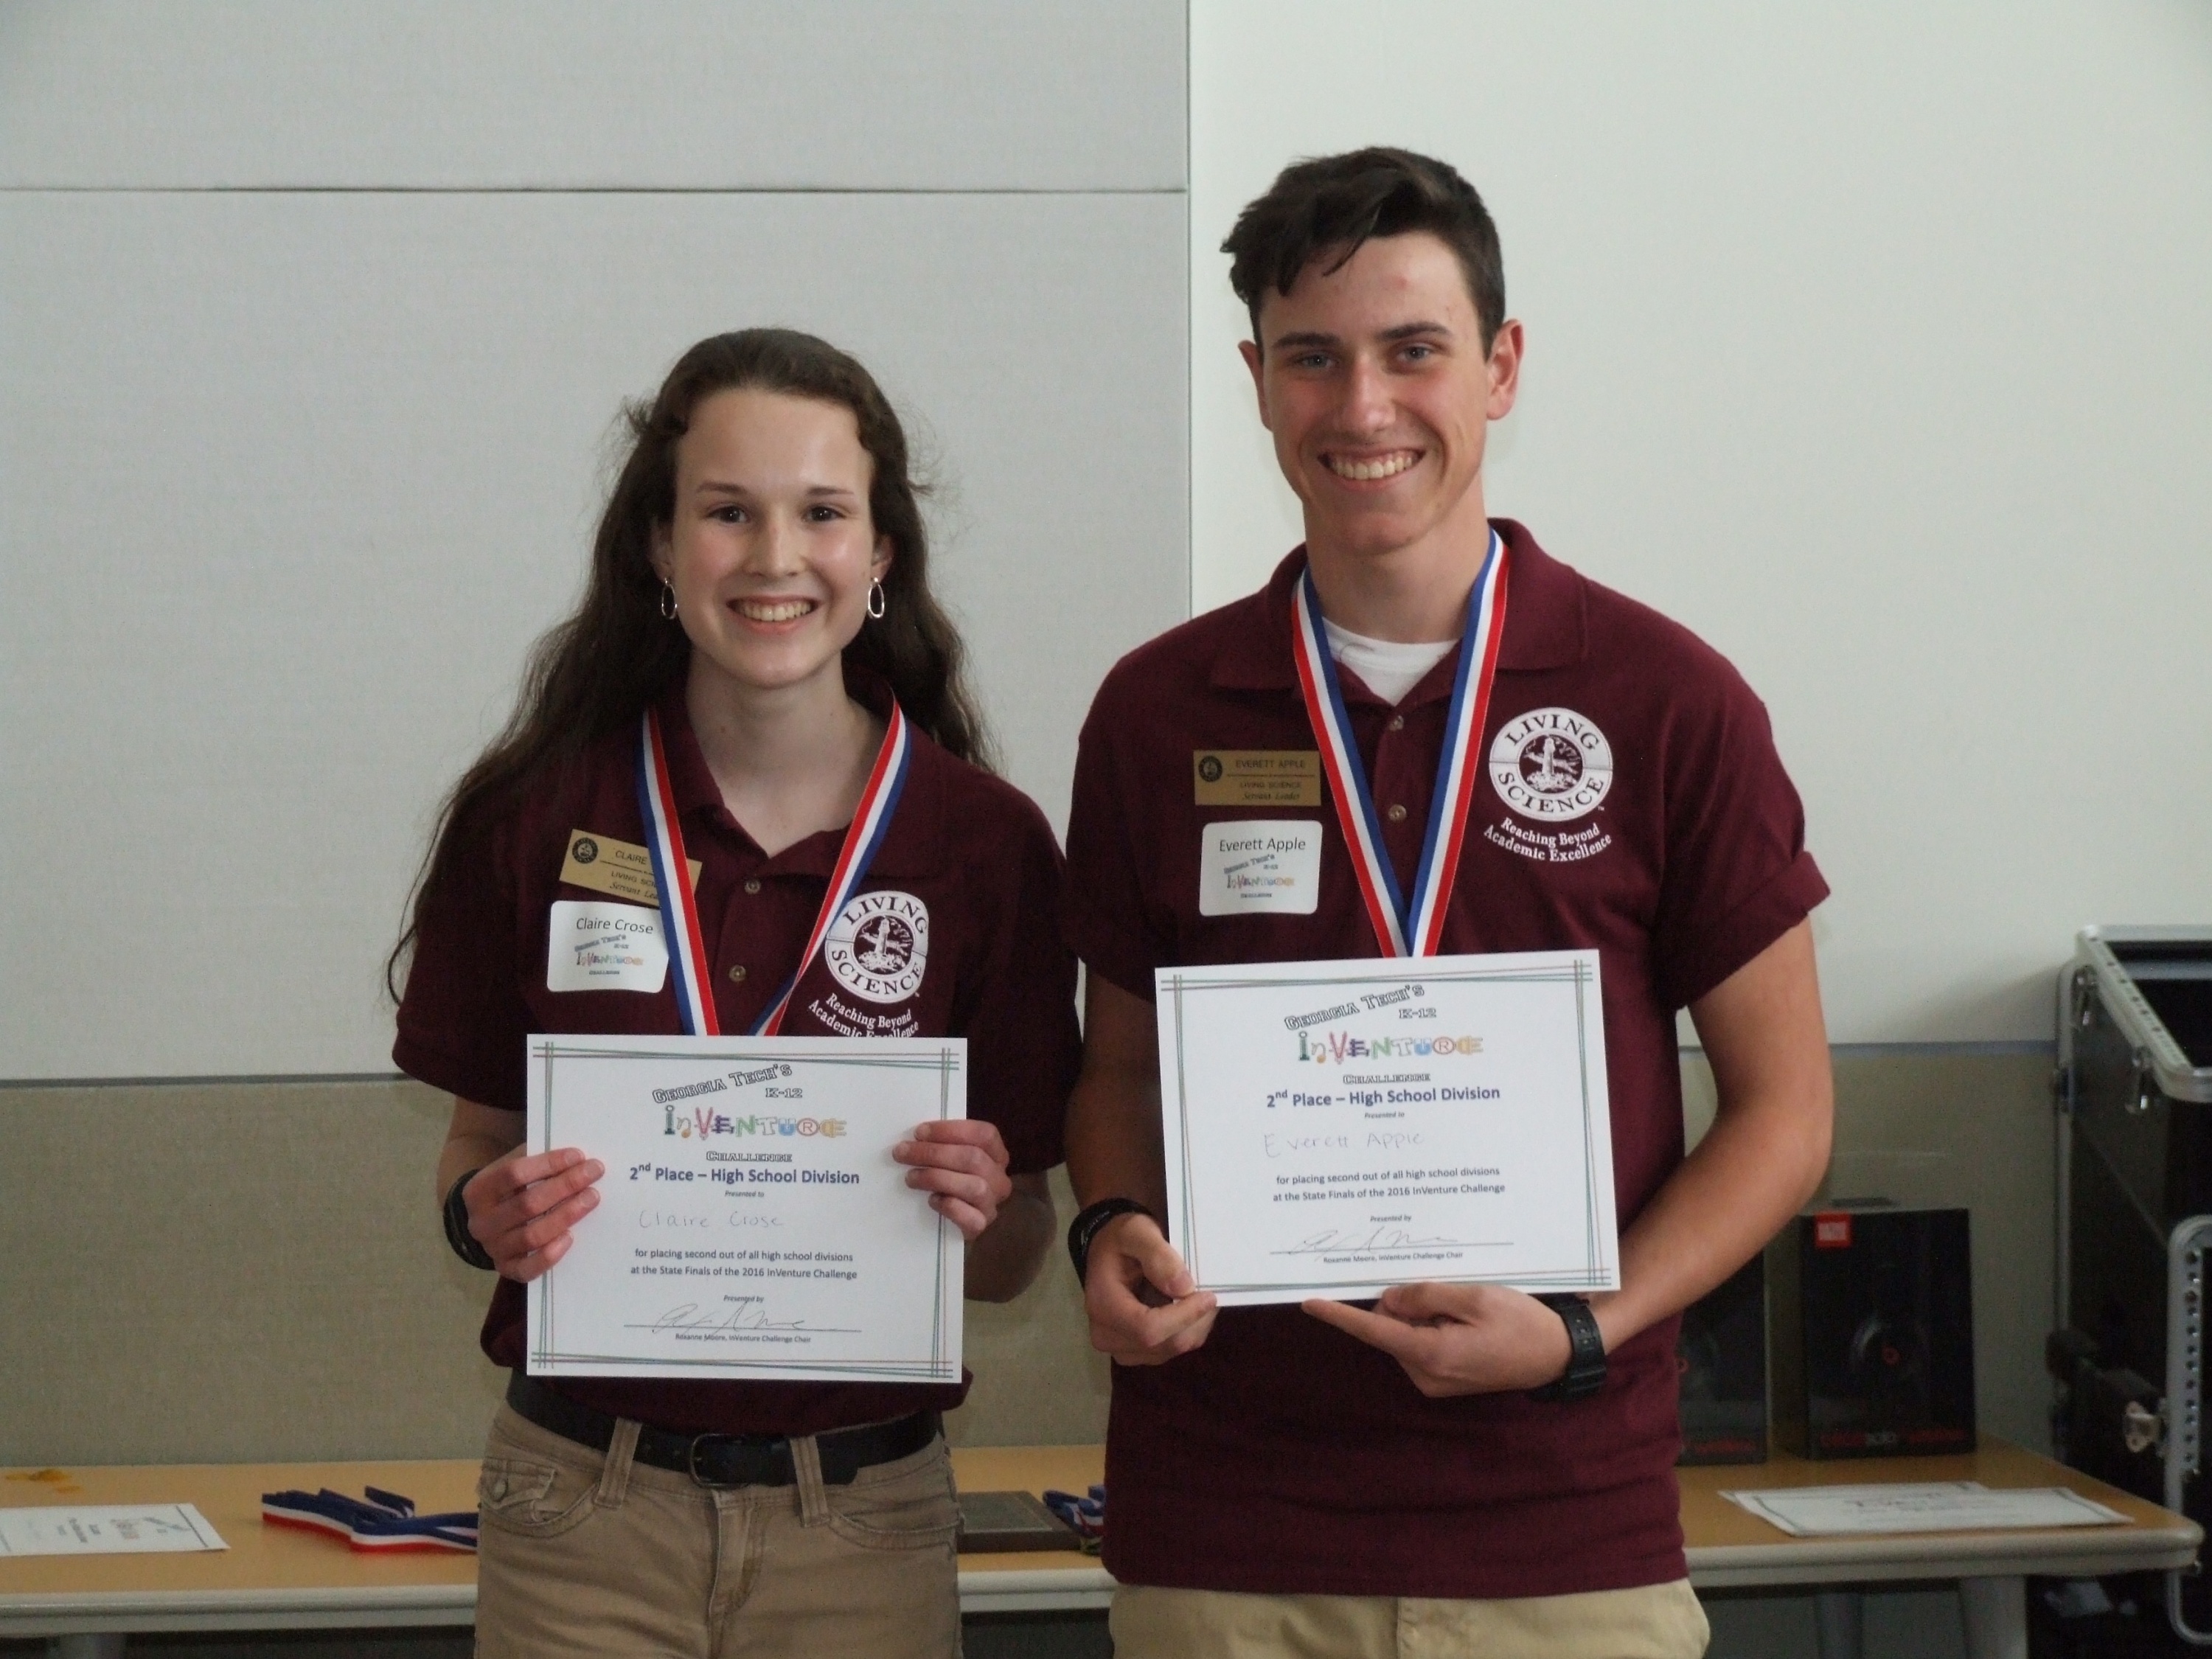 2nd Place High School Award: Team: Wedge Tech School: Living Science School Students: Everett Apple and Claire Crose